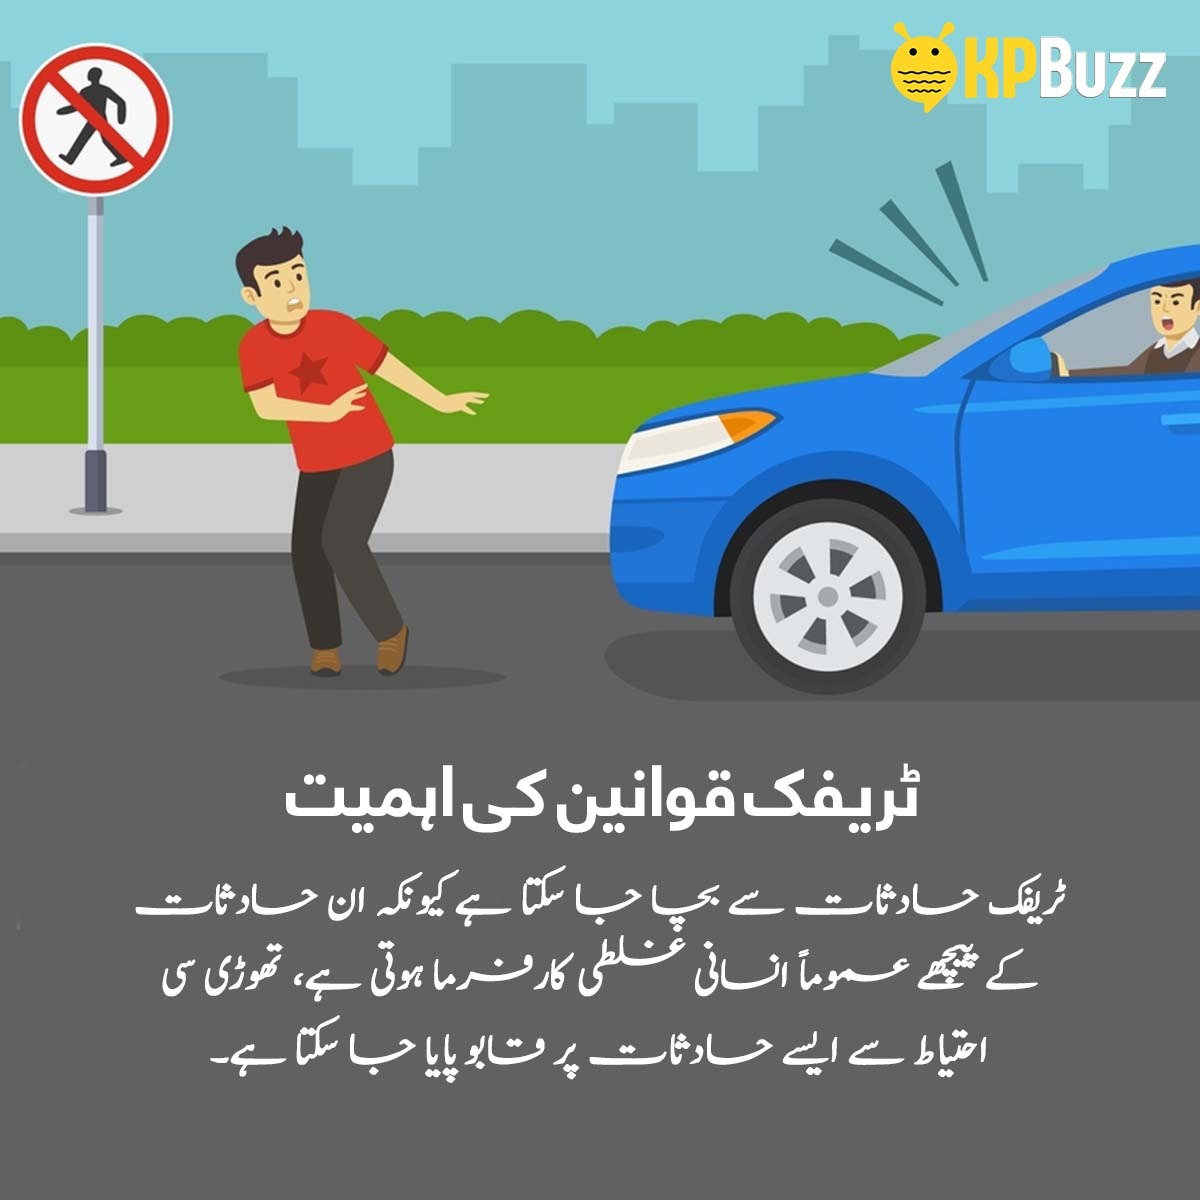 Many accidents can be avoided with a little caution, follow traffic rules to save yourself and others from an unfortunate incident.

@TrafficPeshawar #ObeyTrafficRules #FollowTrafficRules #KPbuzz #پاکستان_دشمن_فتنہ #TurkeySyriaEarthquake 
#TurkeyEarthquake 
#Turkey